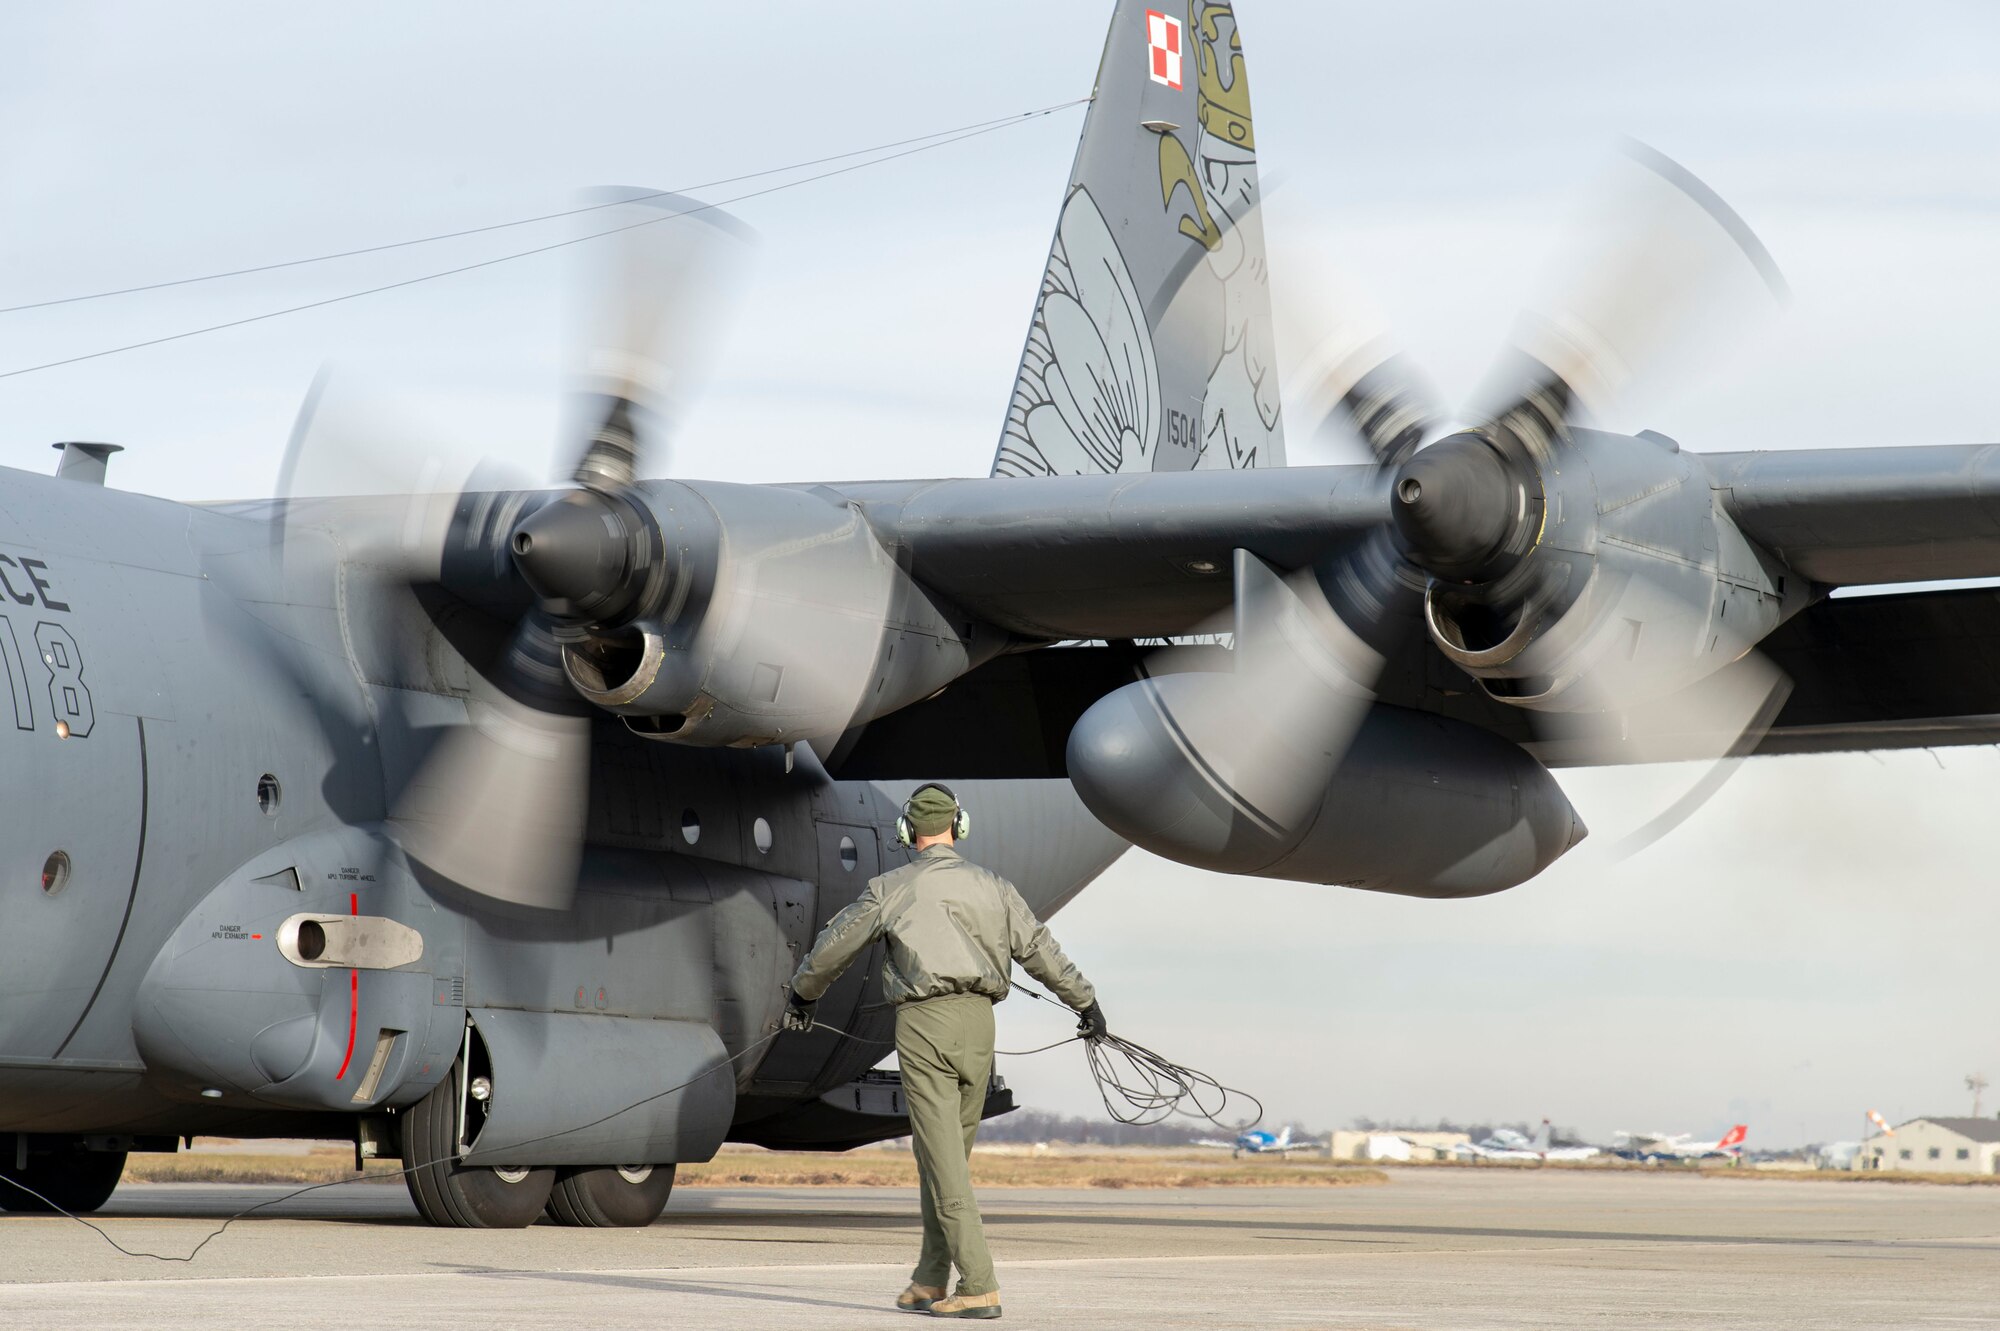 A Polish air force C-130E Hercules starts its engines following a foreign military sales mission Dec. 7, 2021, at Dover Air Force Base, Delaware. The United States and Poland have enjoyed decades-long warm bilateral relations. Poland is a stalwart NATO ally, and both the U.S. and Poland remain committed to the regional security and prosperity of Europe. Due to its strategic location, Dover AFB supports approximately $3.5 billion worth of foreign military sales annually. (U.S. Air Force photo by Roland Balik)